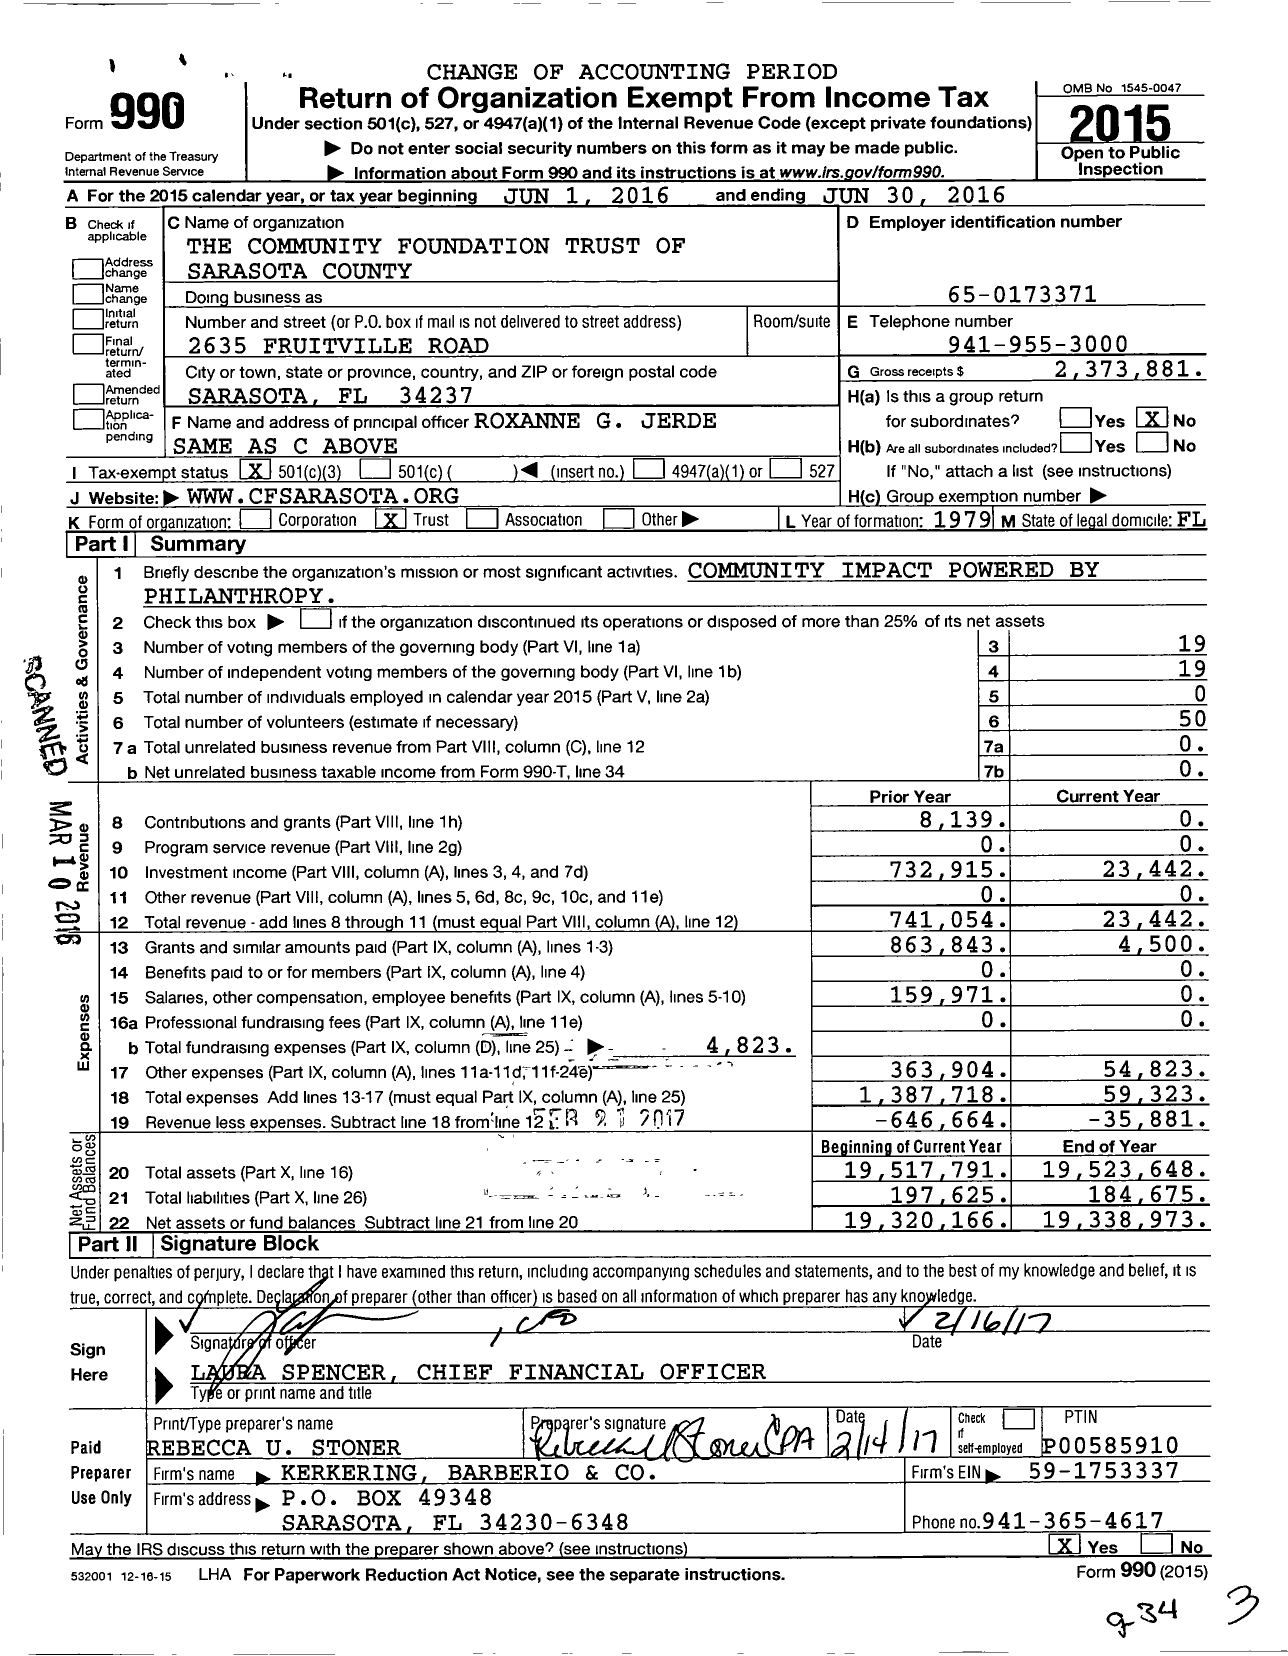 Image of first page of 2015 Form 990 for The Community Foundation Trust of Sarasota County